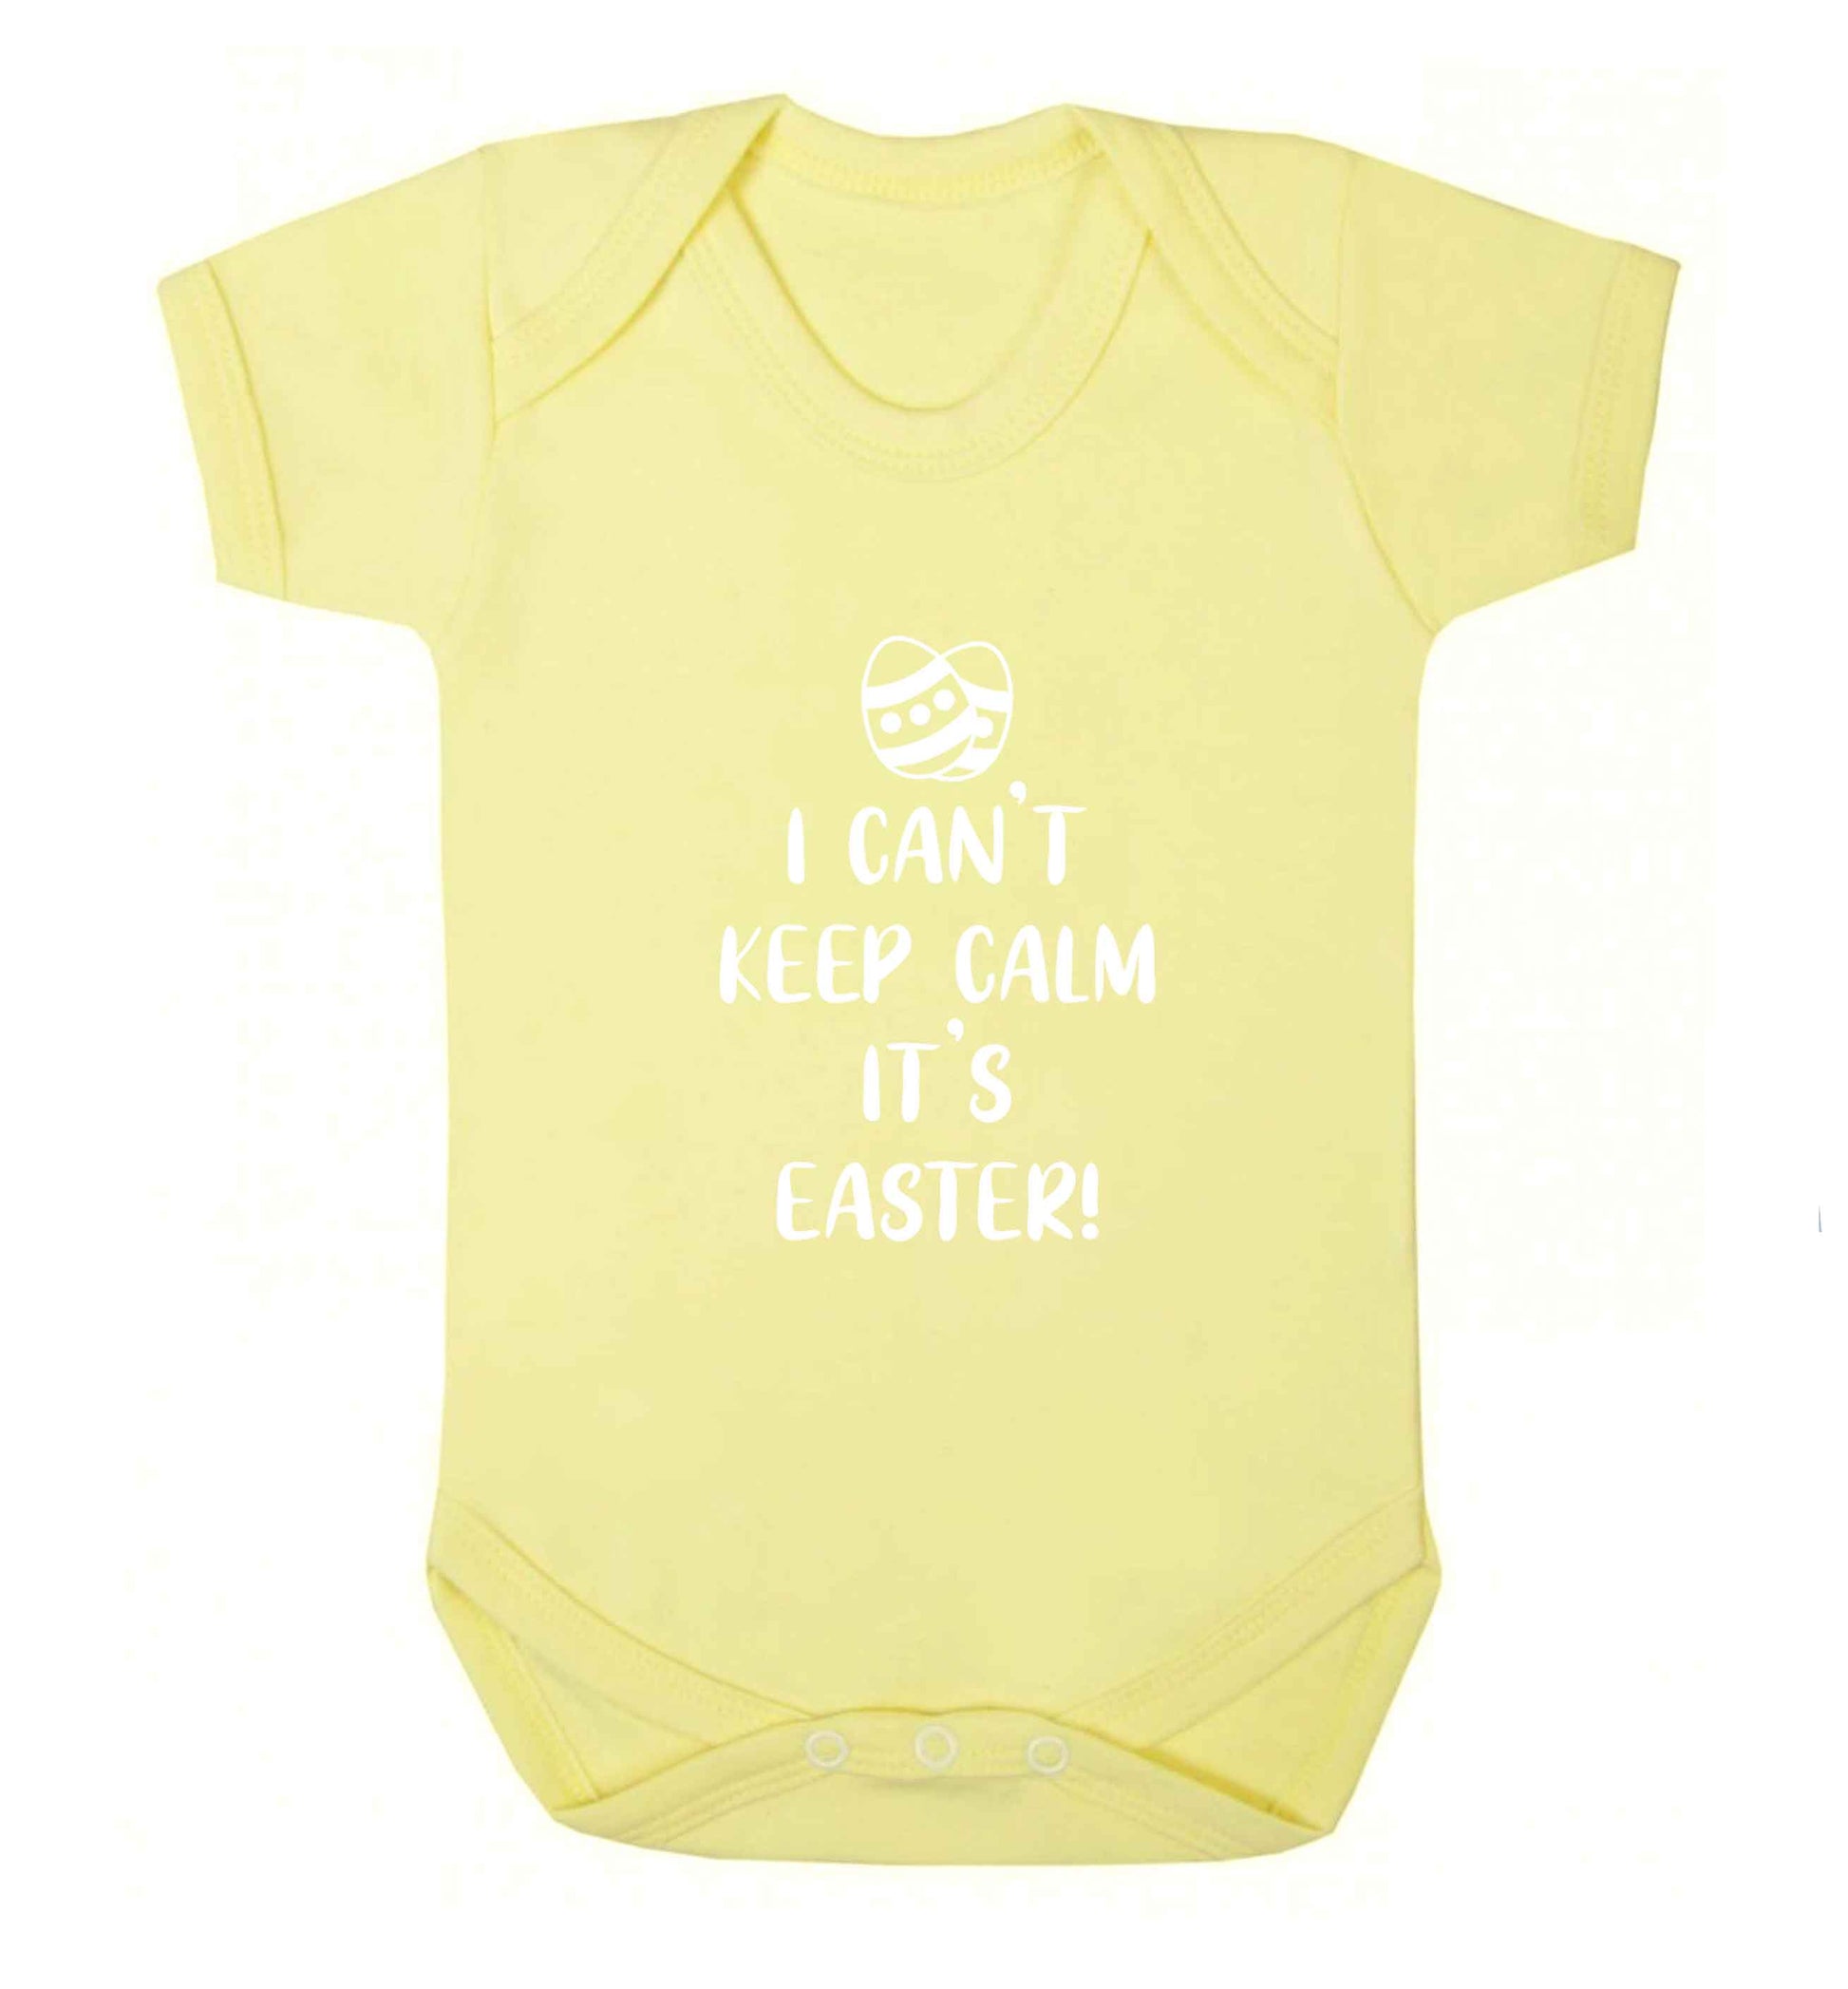 I can't keep calm it's Easter baby vest pale yellow 18-24 months